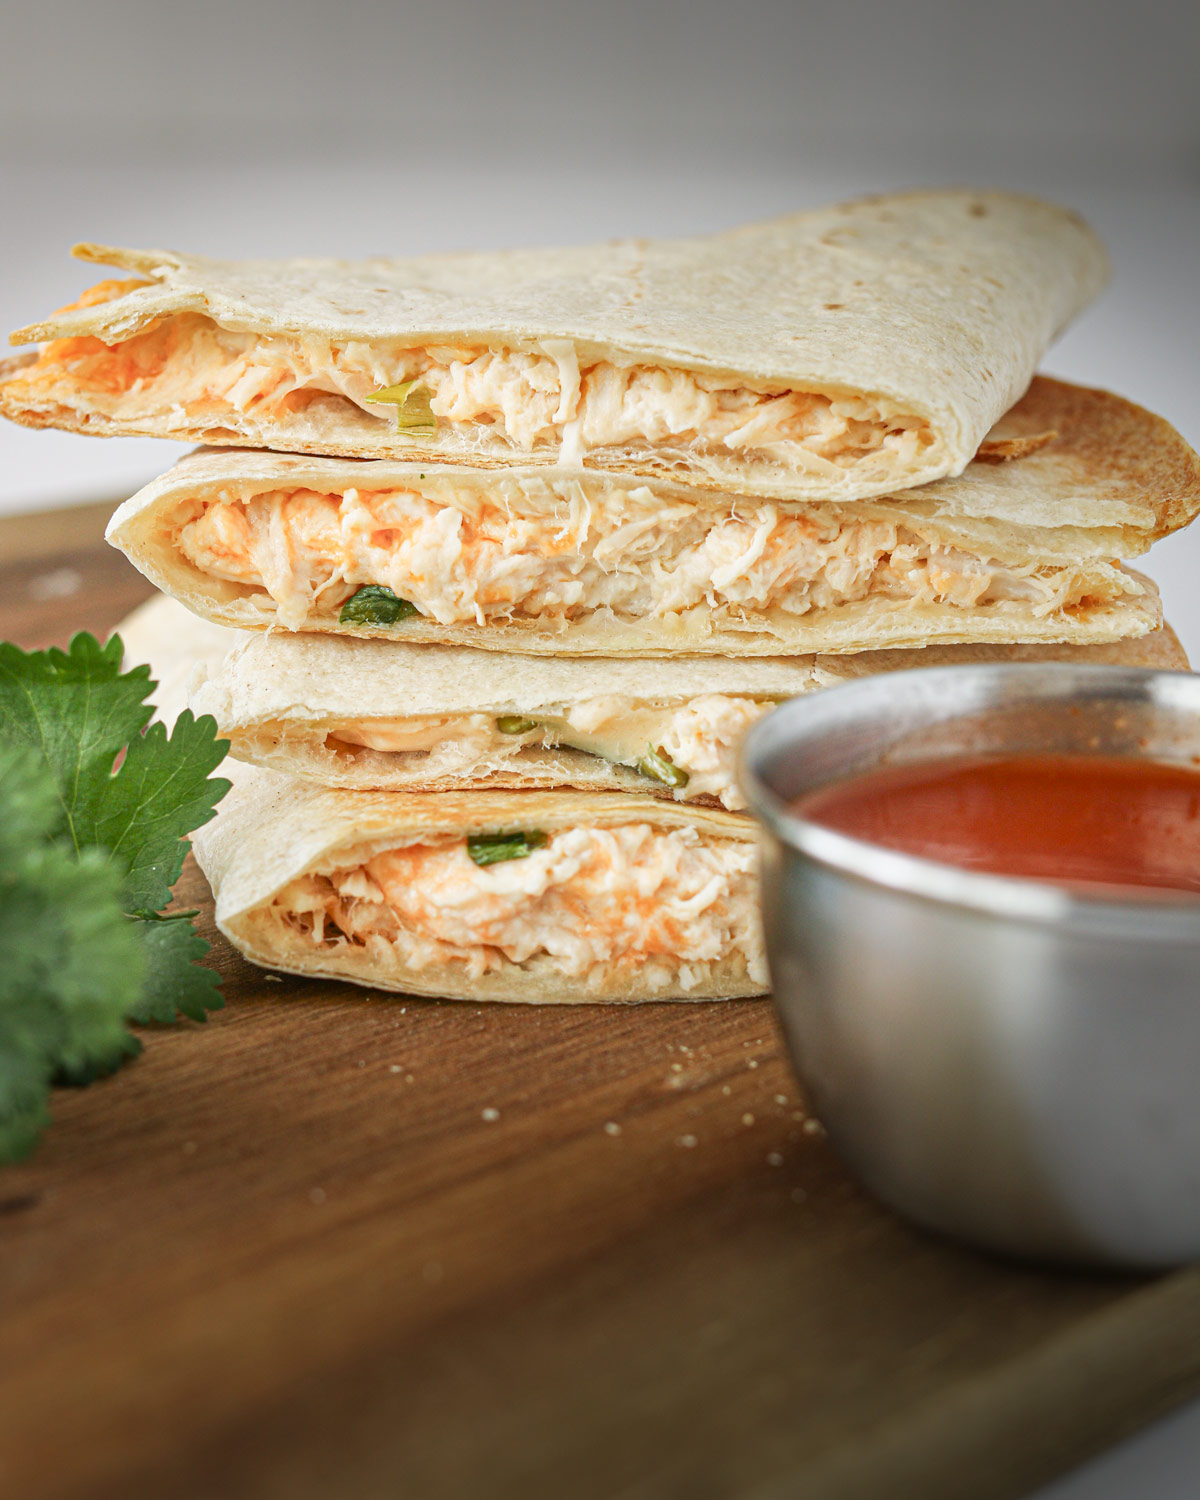 buffalo chicken quesadillas stacked on a wooden board with sauce in a cup.